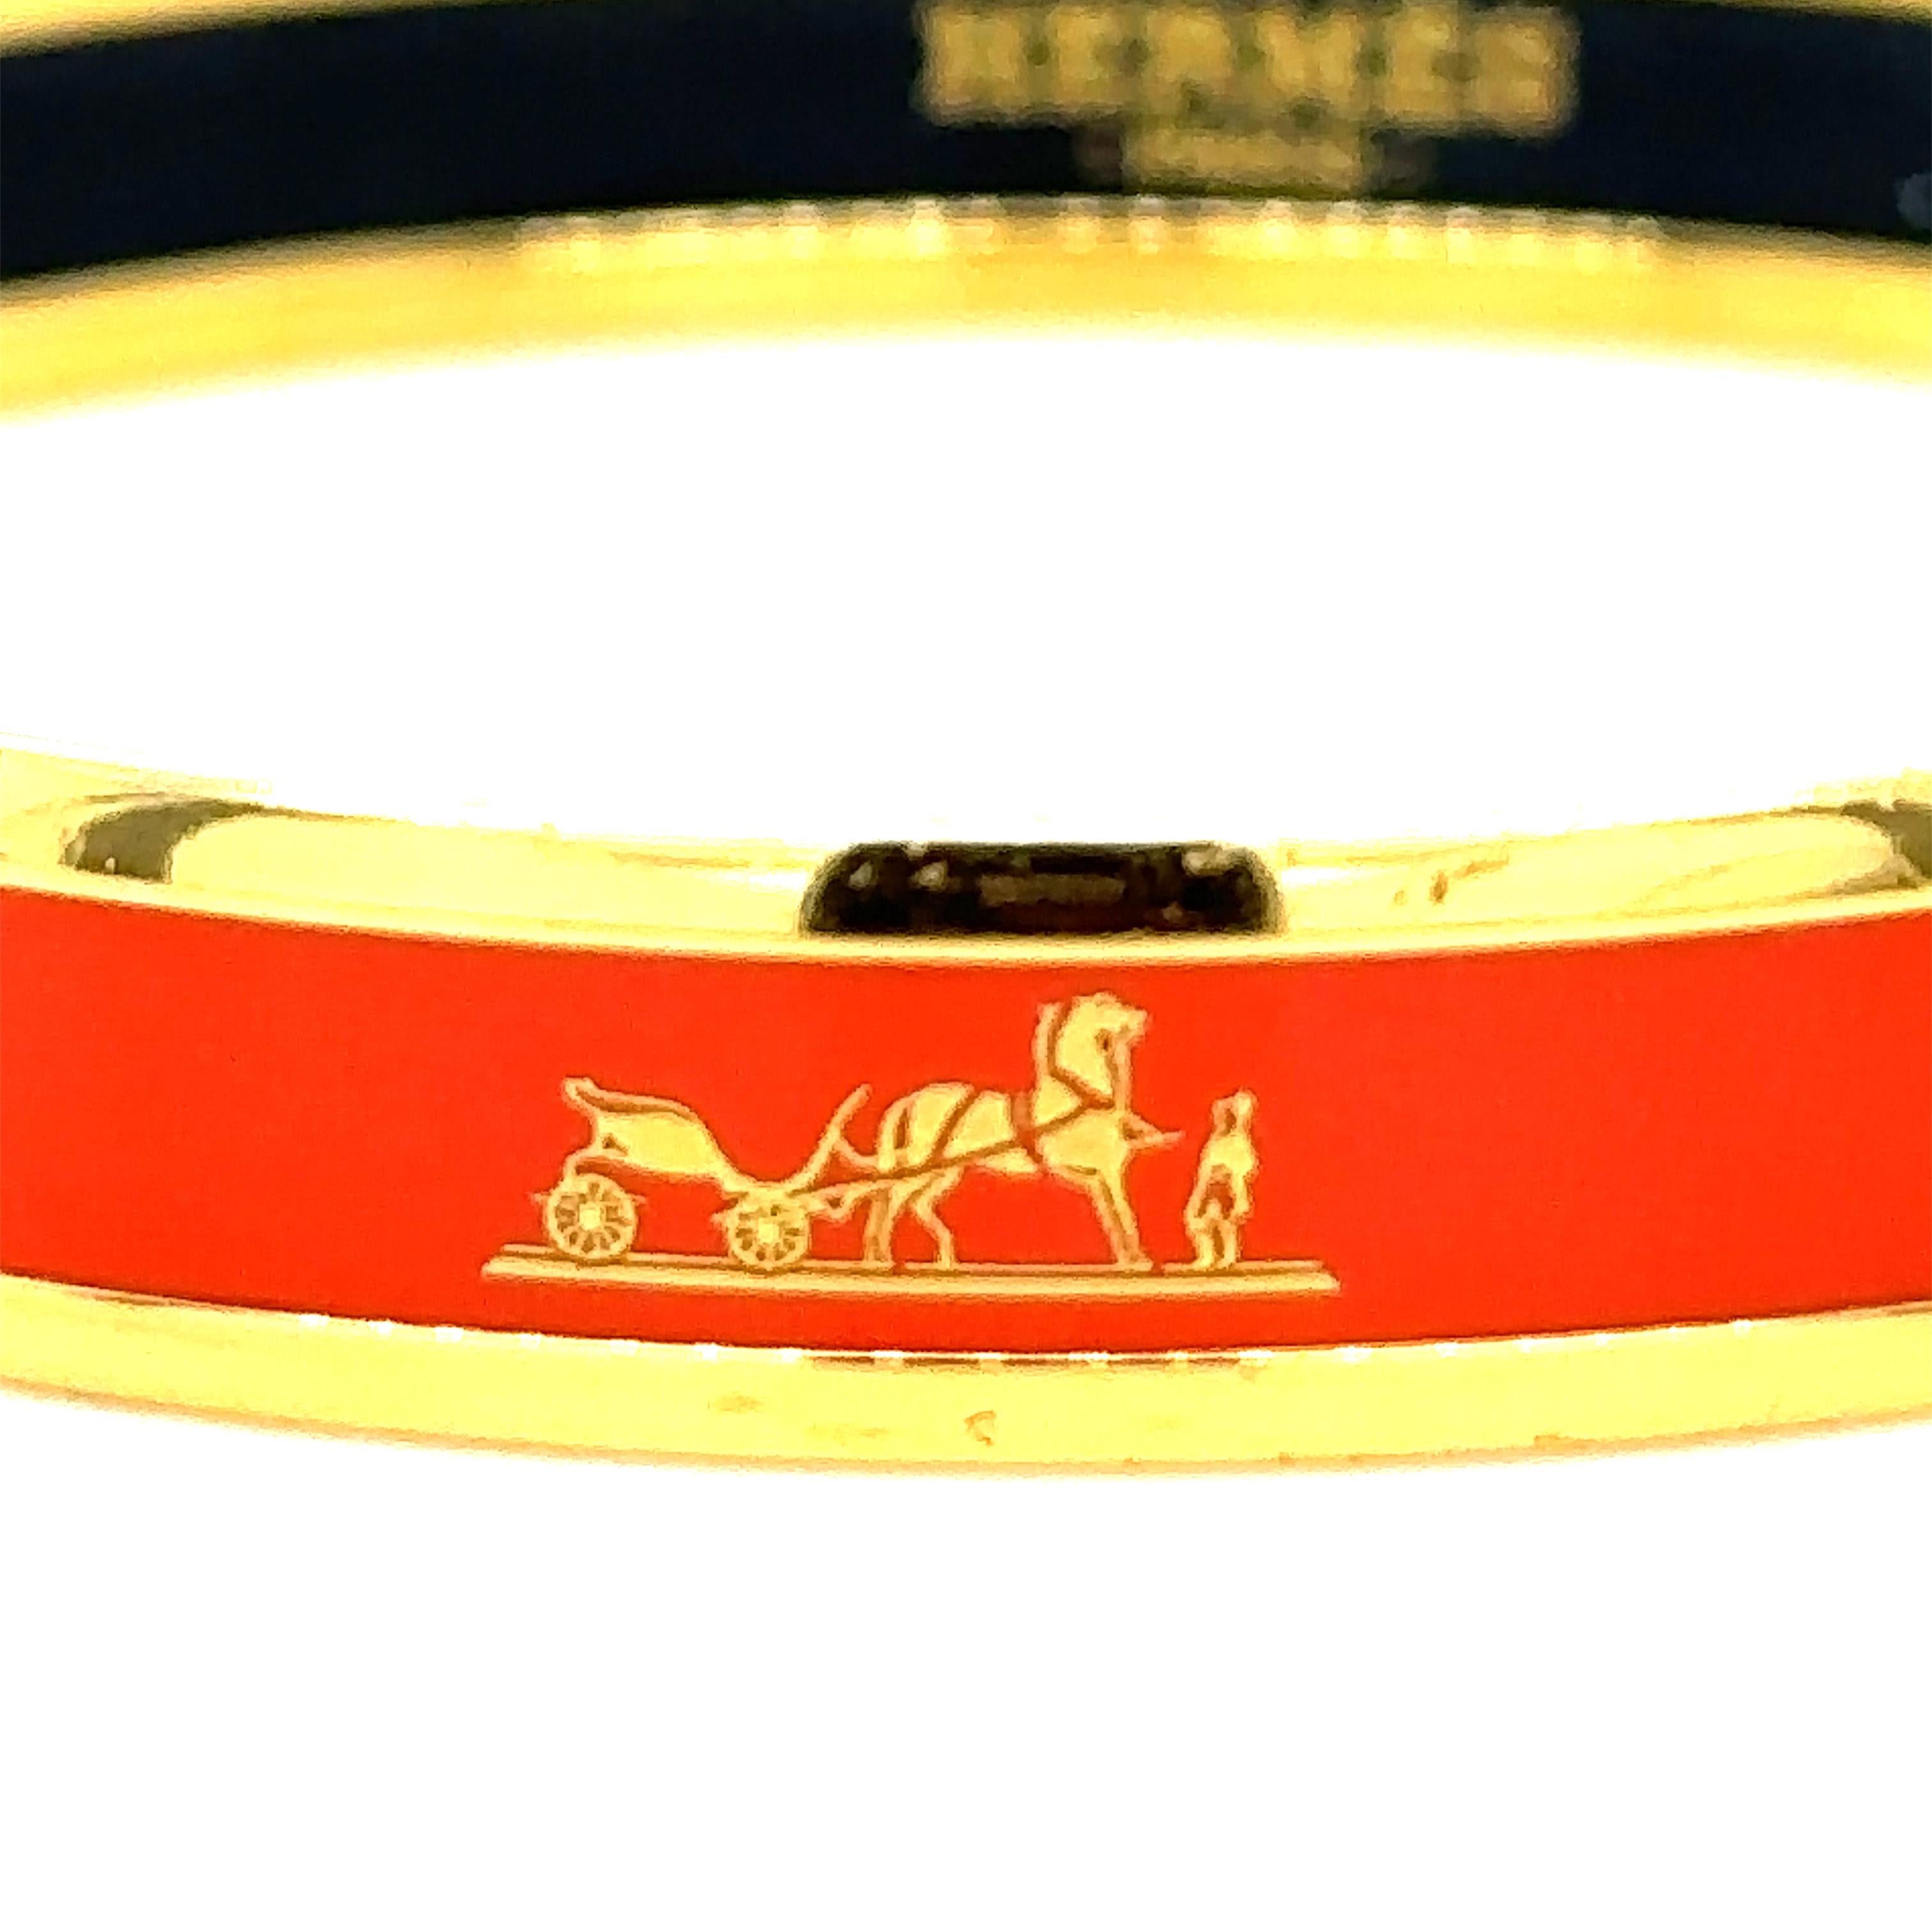 A Hermes Red Enamel Gold Plated Caleche Narrow Bangle Bracelet.

This narrow enamel bangle features gold plated trim with red enamel and a tiny signature horse and carriage design. Wear it along or with a stack of bangles for an instantly chic